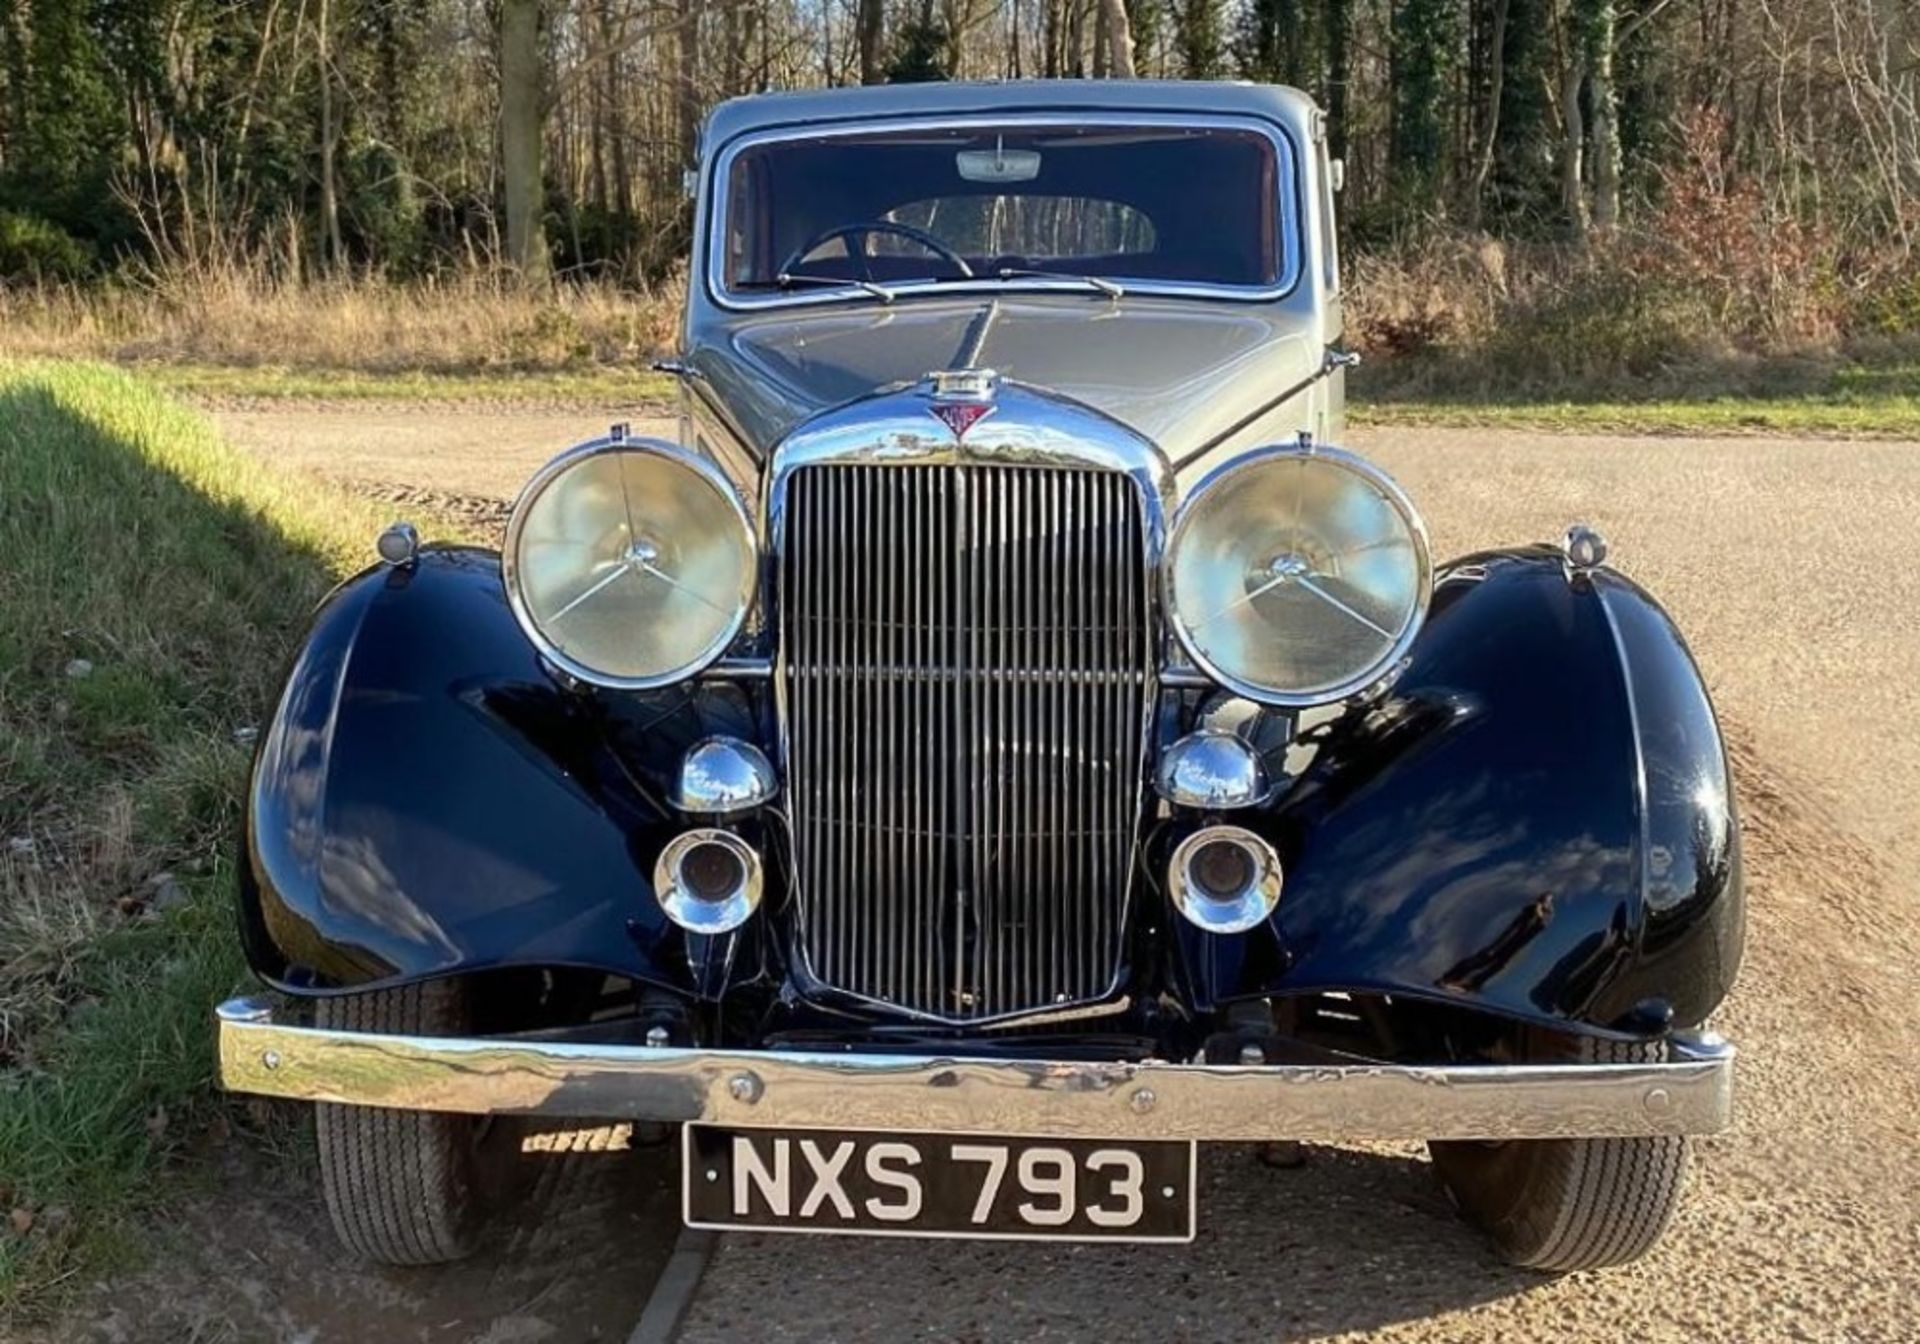 1936 ALVIS SILVER CREST 20/92 FOUR LIGHT SALOON  Registration Number: NXS 793 Chassis Number: - Image 21 of 34